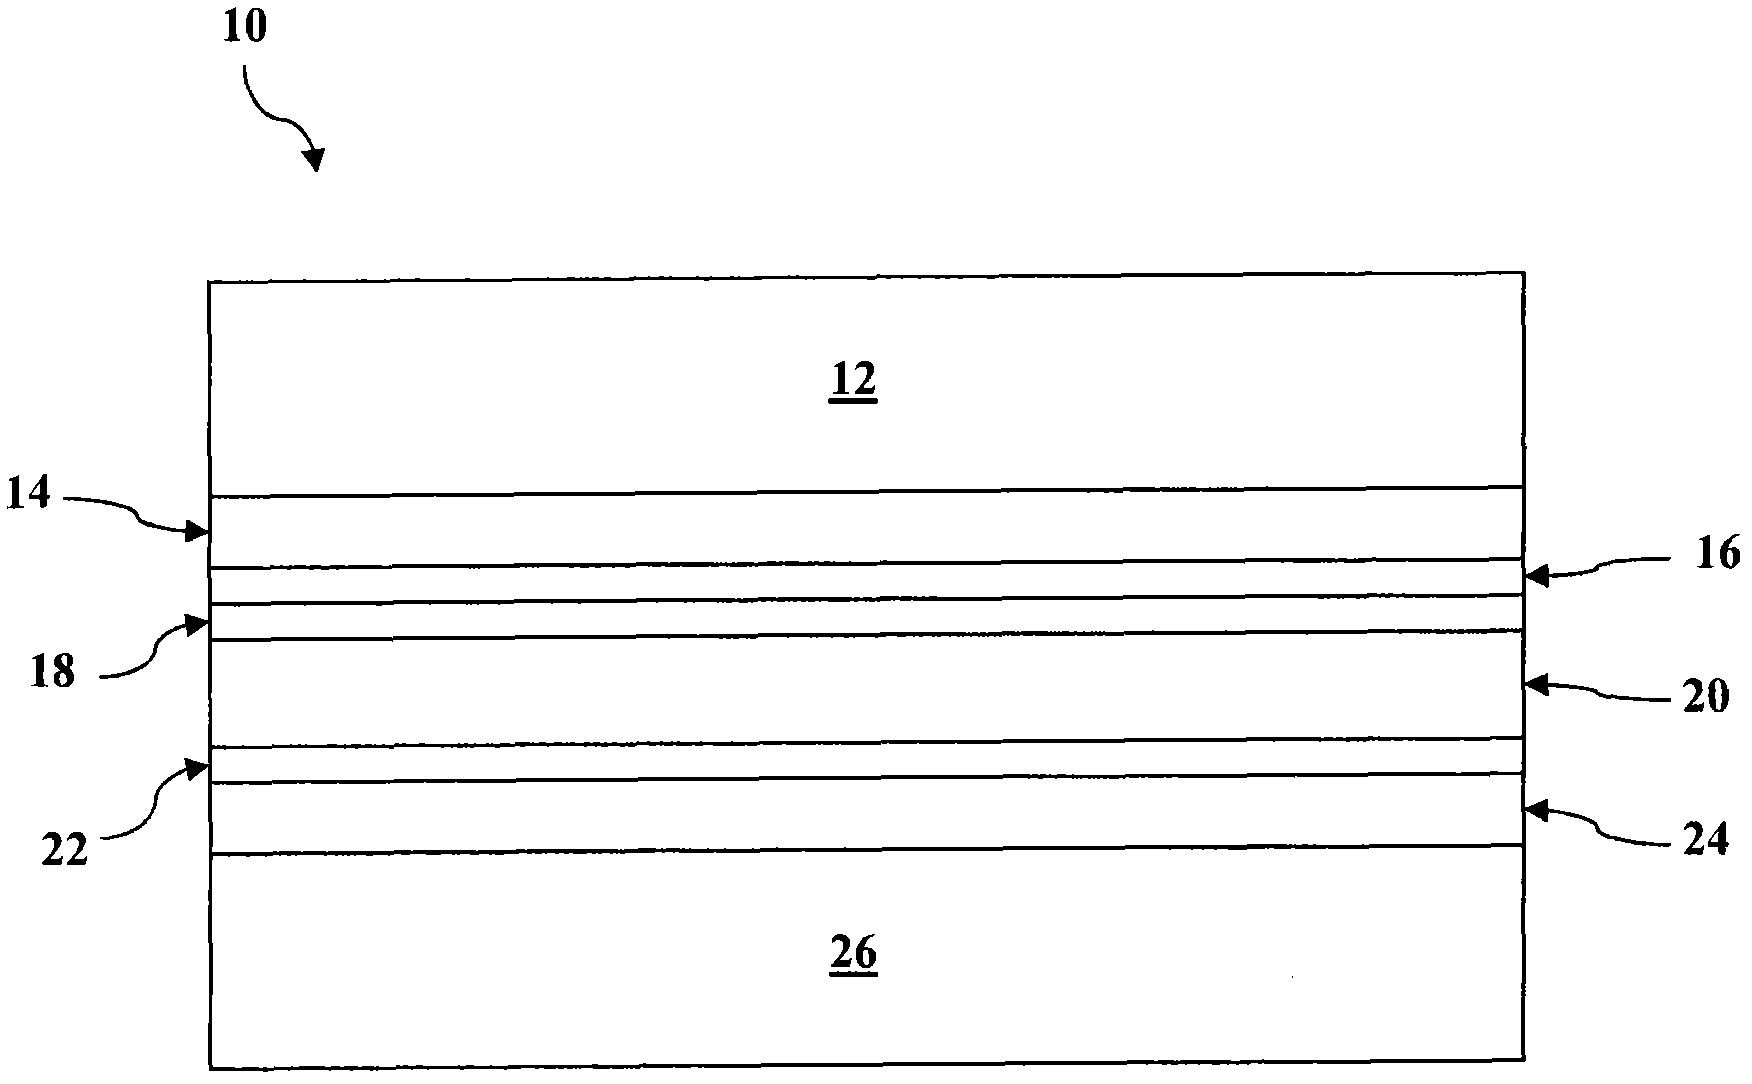 Graded alloy telluride layer in cadmium telluride thin film photovoltaic devices and methods of manufacturing the same